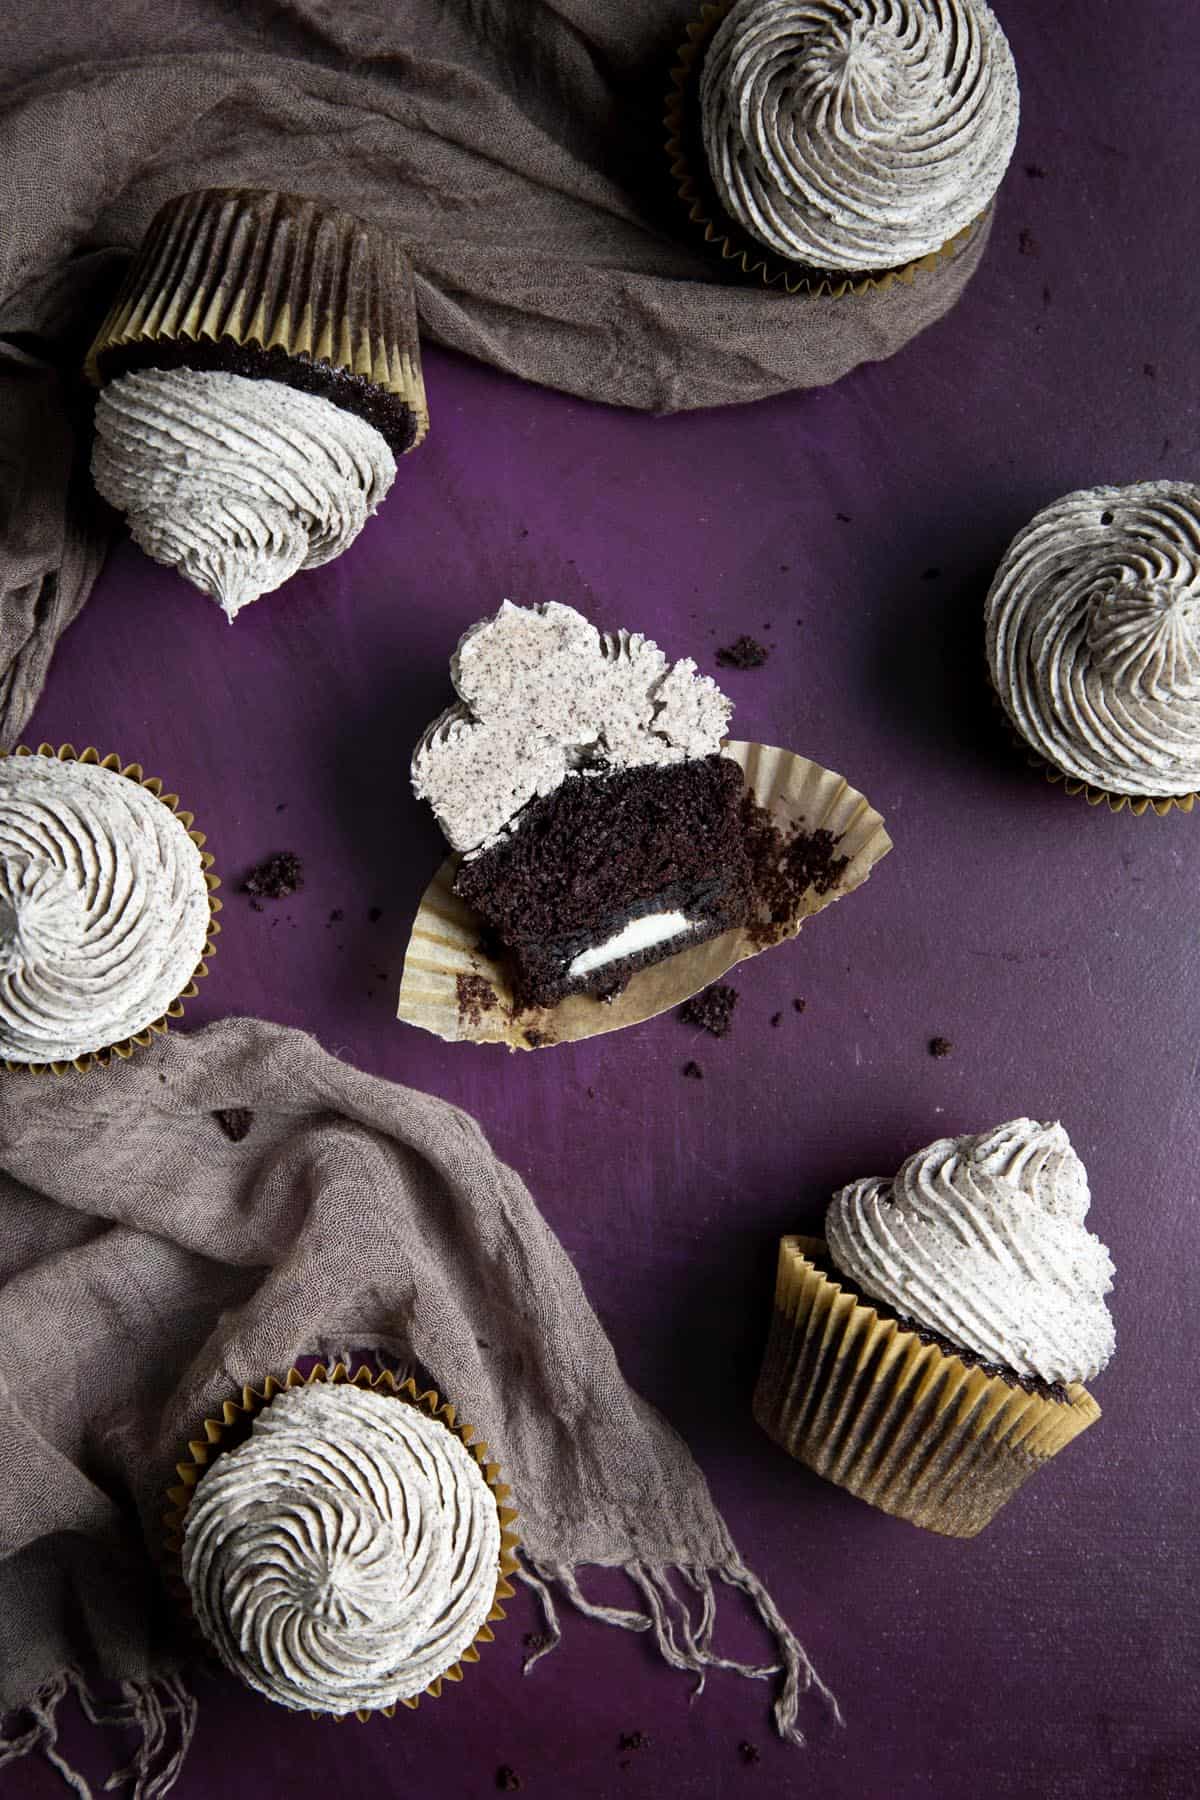 A chocolate Oreo cupcake cut in half revealing the whole Oreo in the middle.